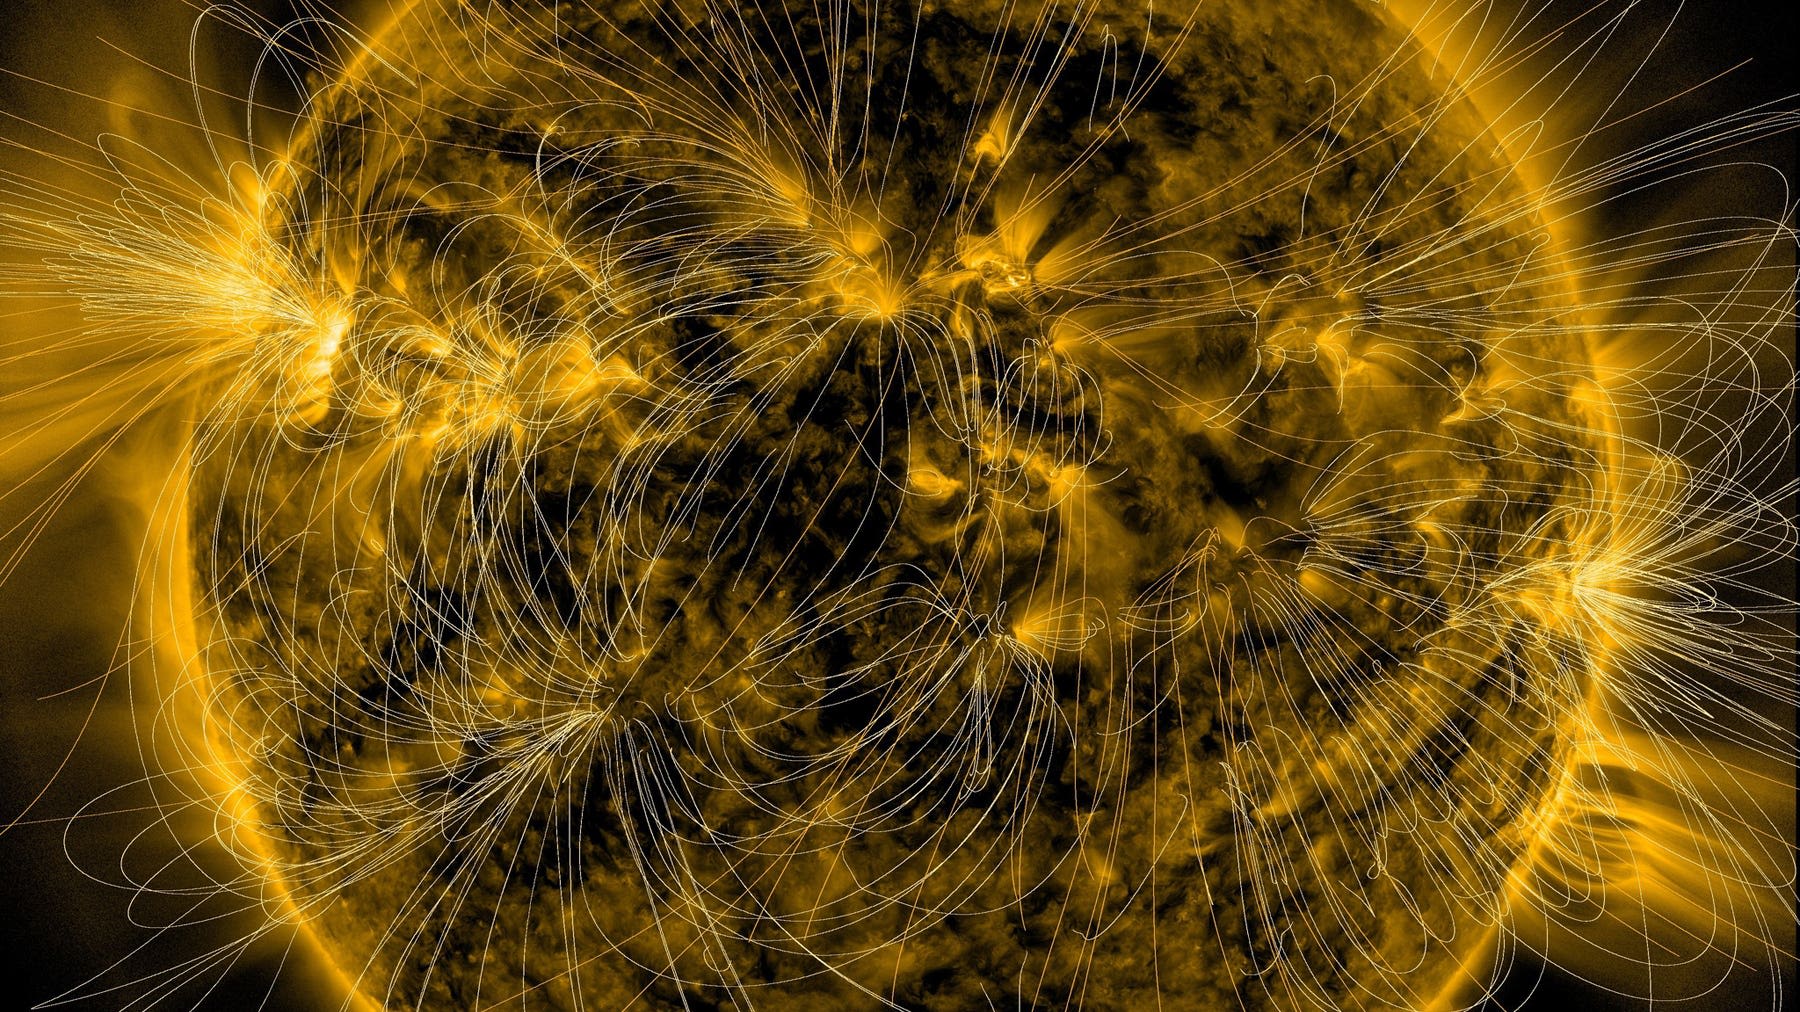 Astronomers shed new light on puzzling origins of Sun’s magnetic field